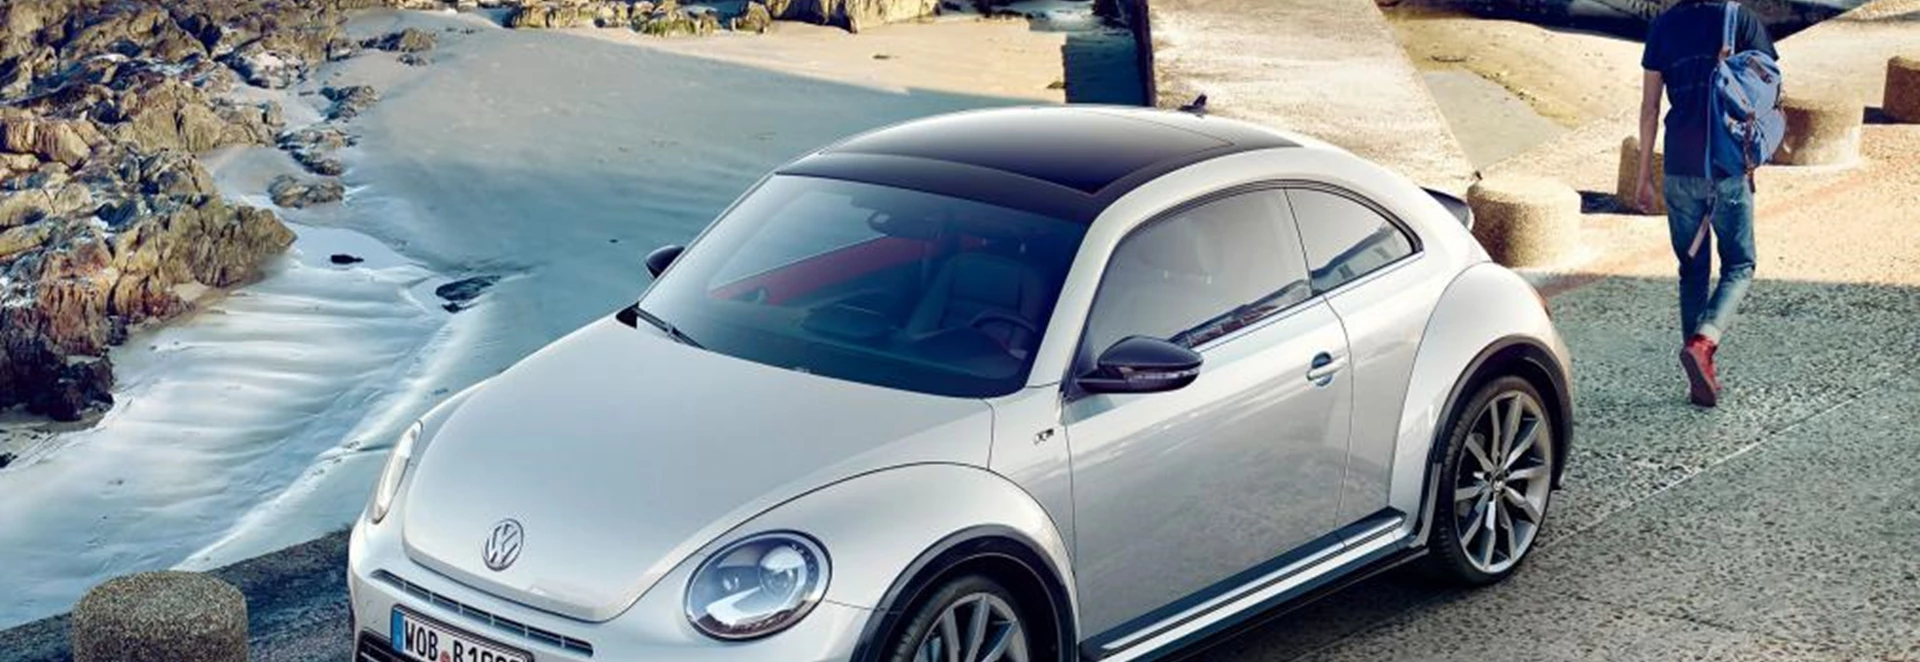 Volkswagen Beetle gets a new look and R-Line trim 